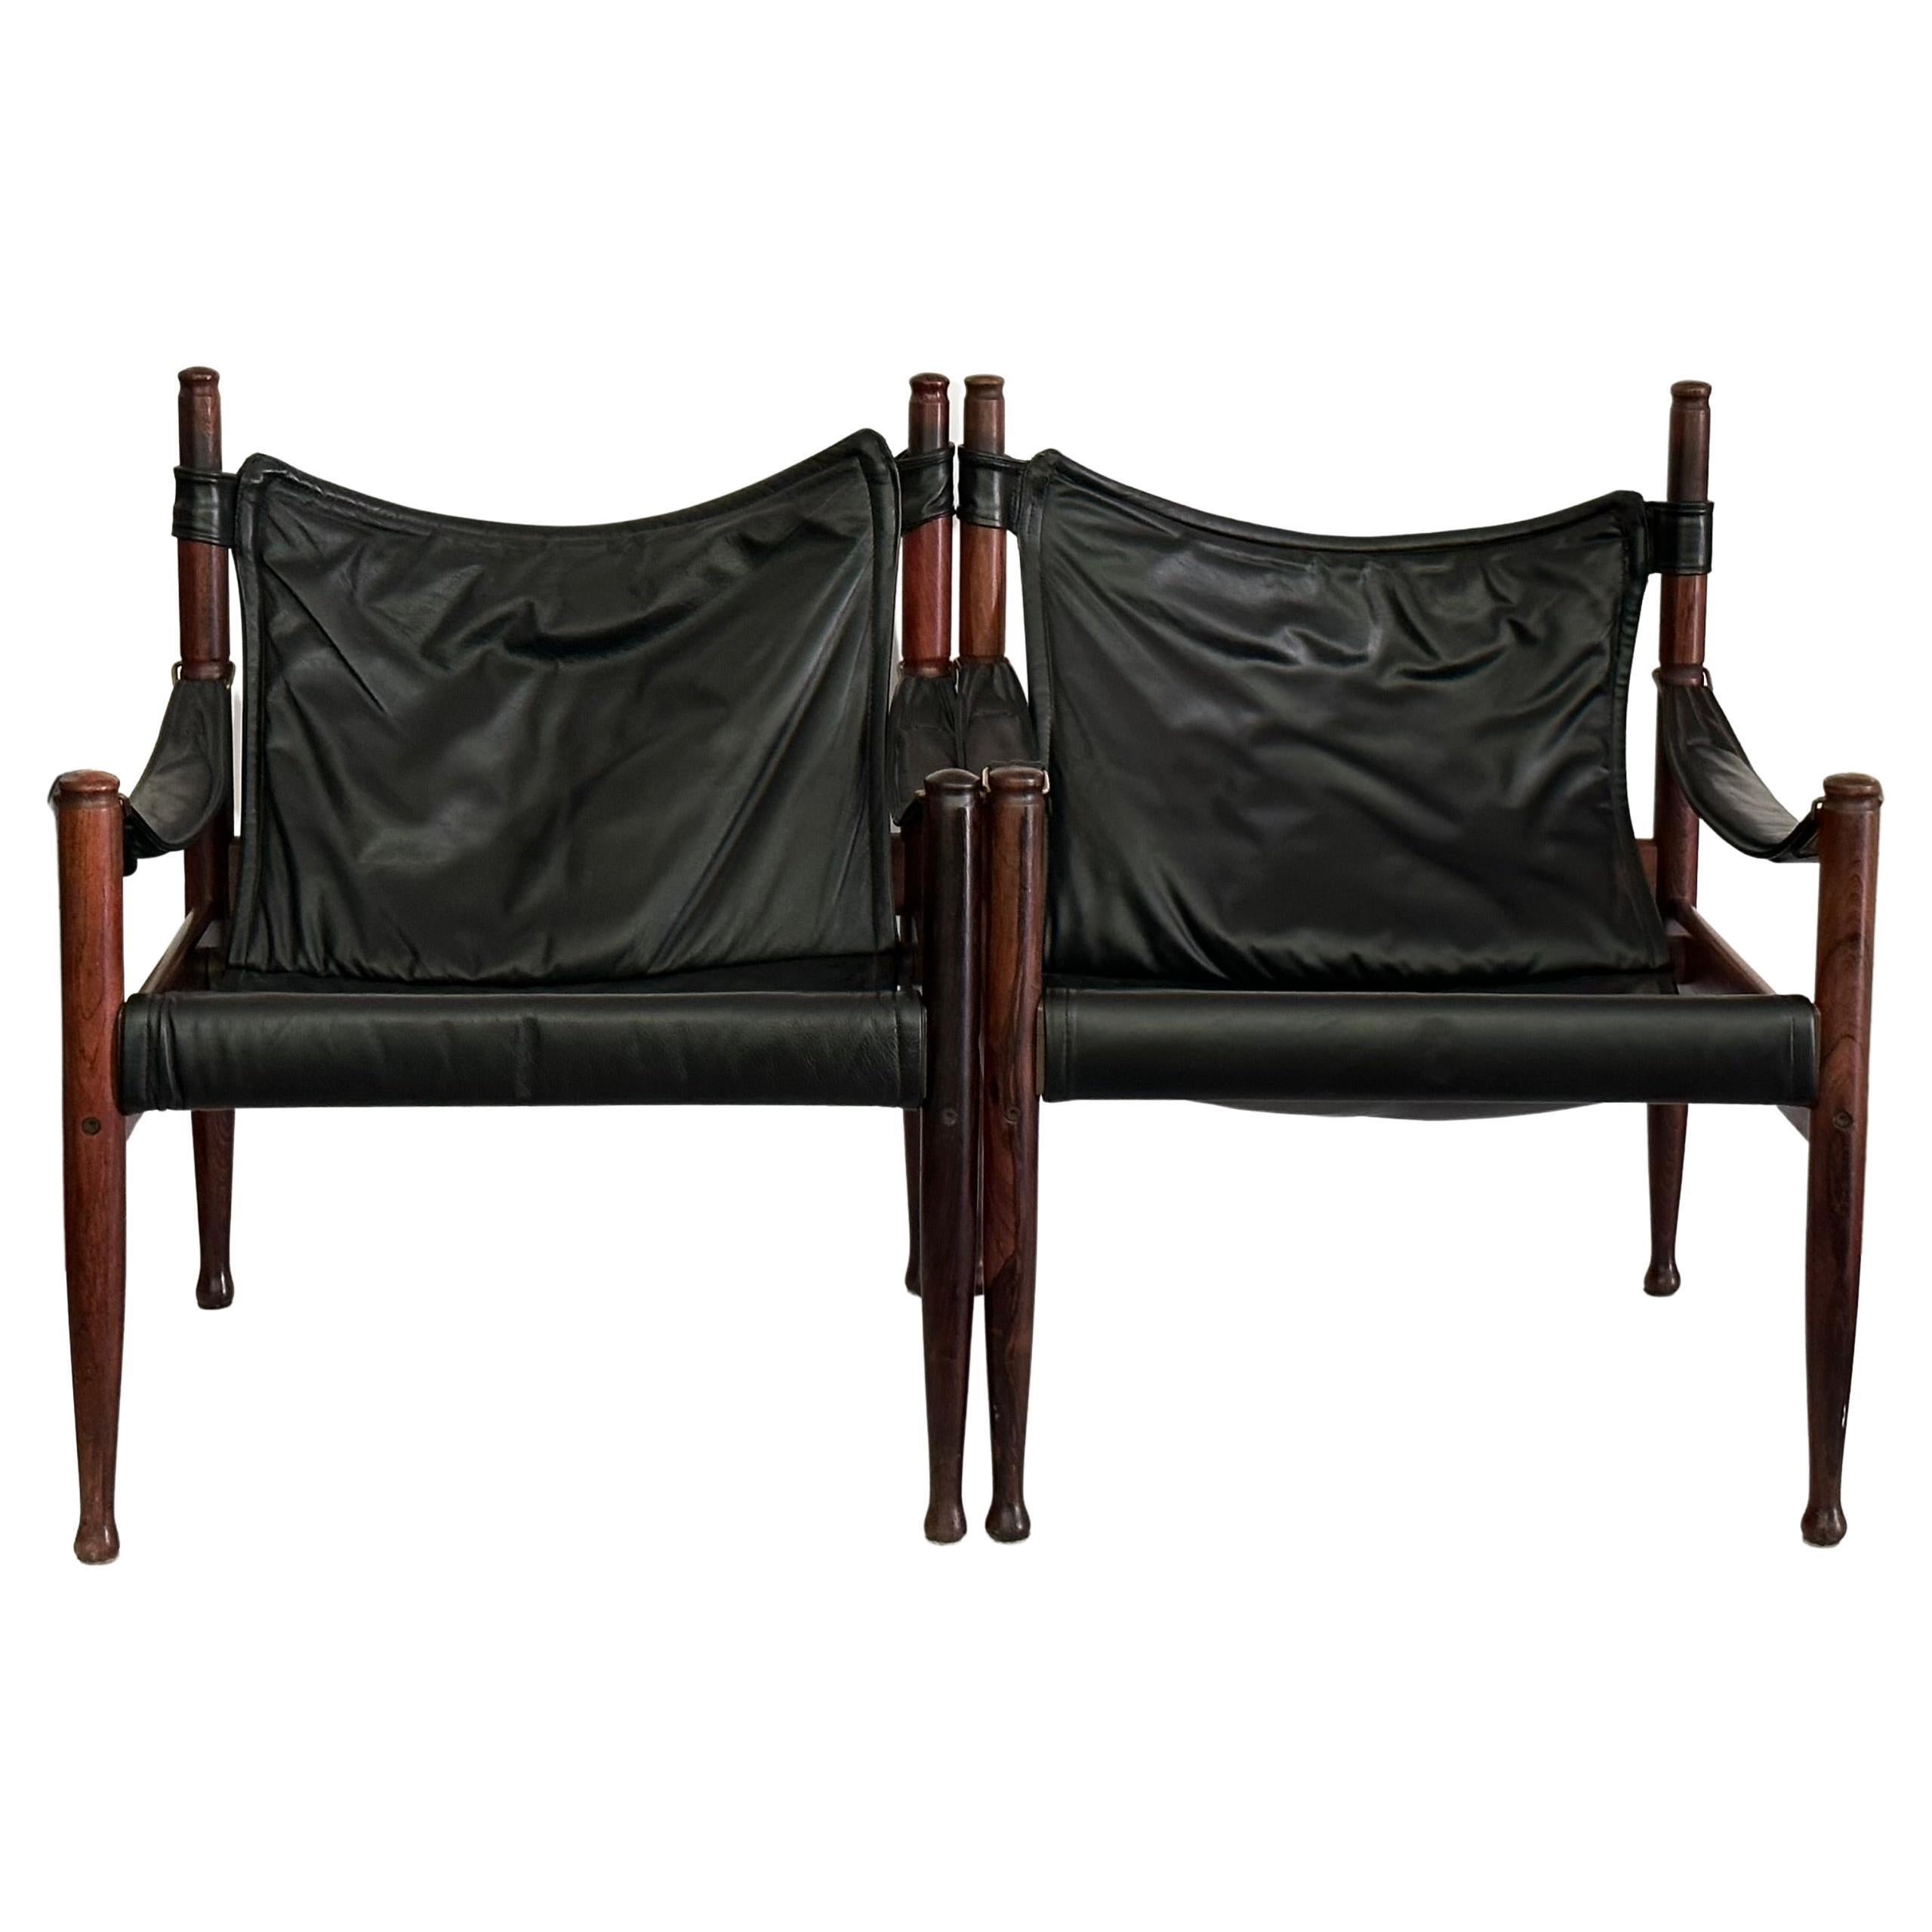 A fantastic highback pair of safari lounge chairs in beautiful rosewood  and black leather designed by Erik Wørts for Niels Eilersen, Denmark, manufactured in midcentury, circa 1960 (late 1950s or early 1960s). A very dynamic design with soft